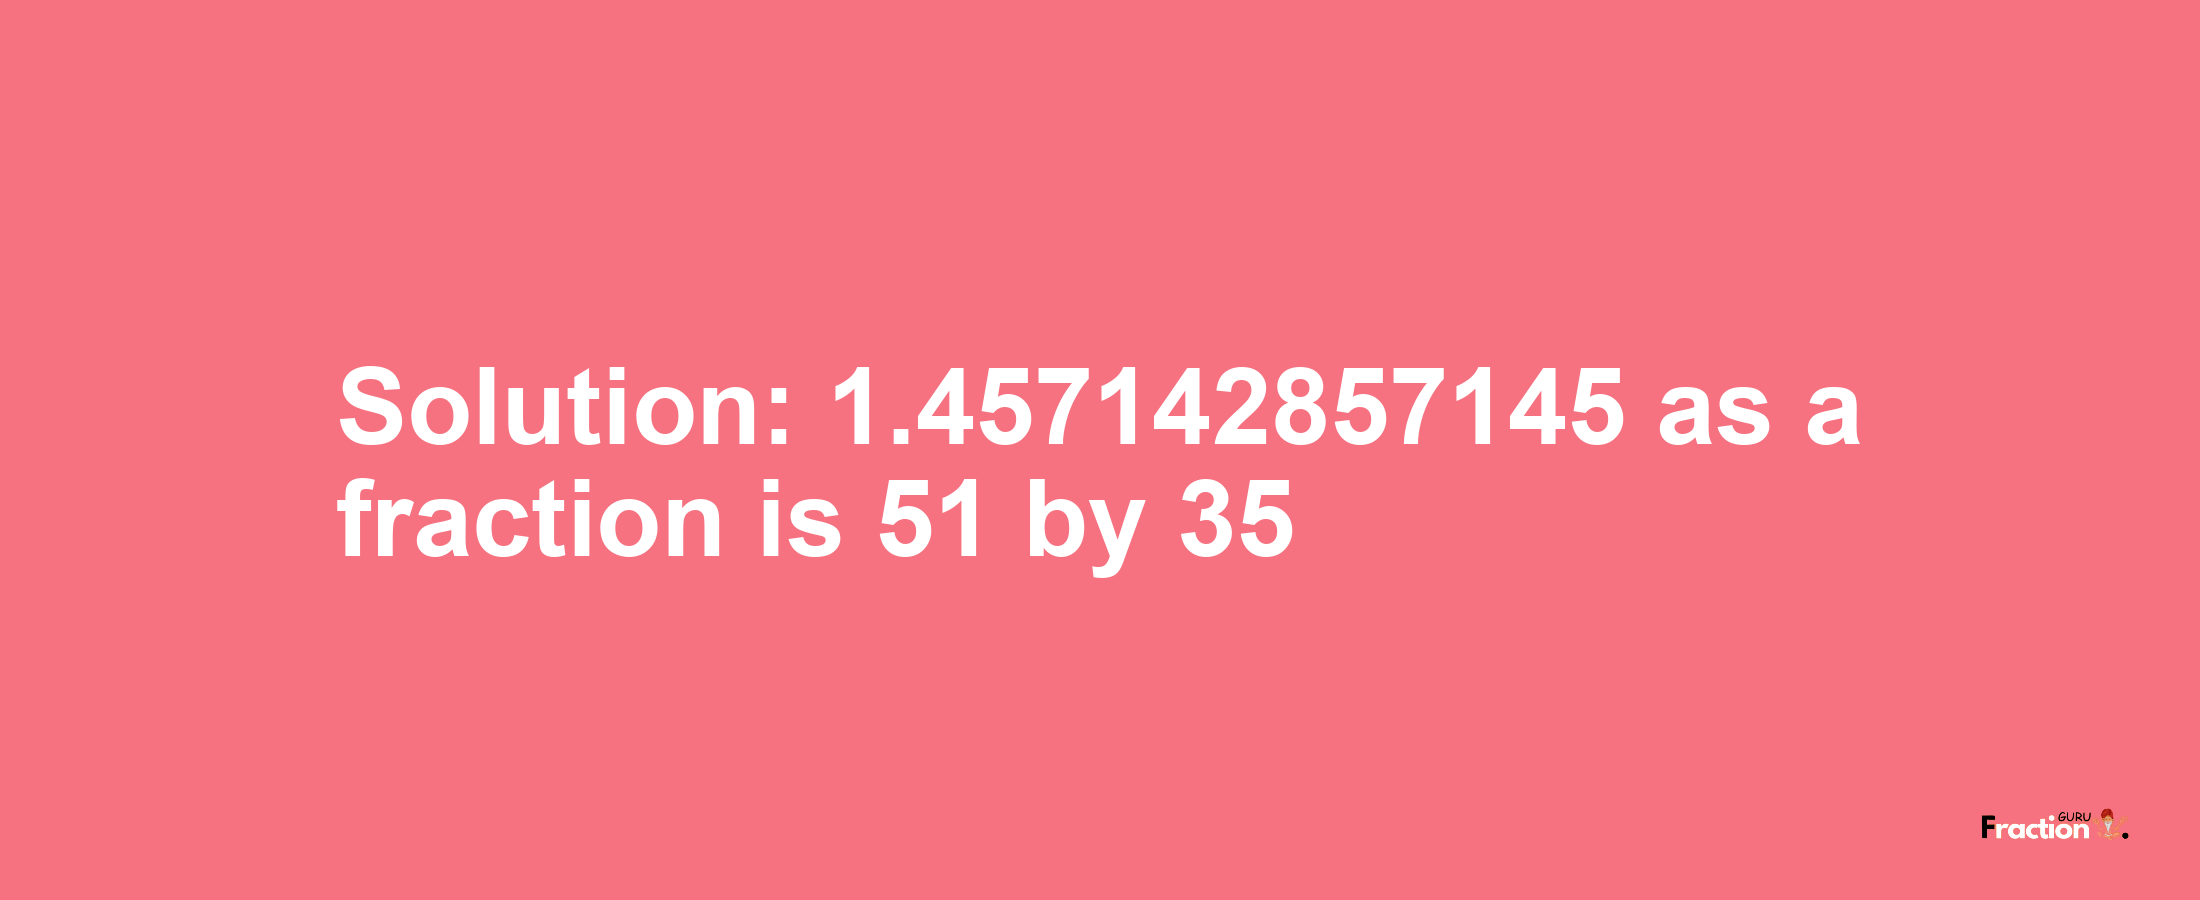 Solution:1.457142857145 as a fraction is 51/35